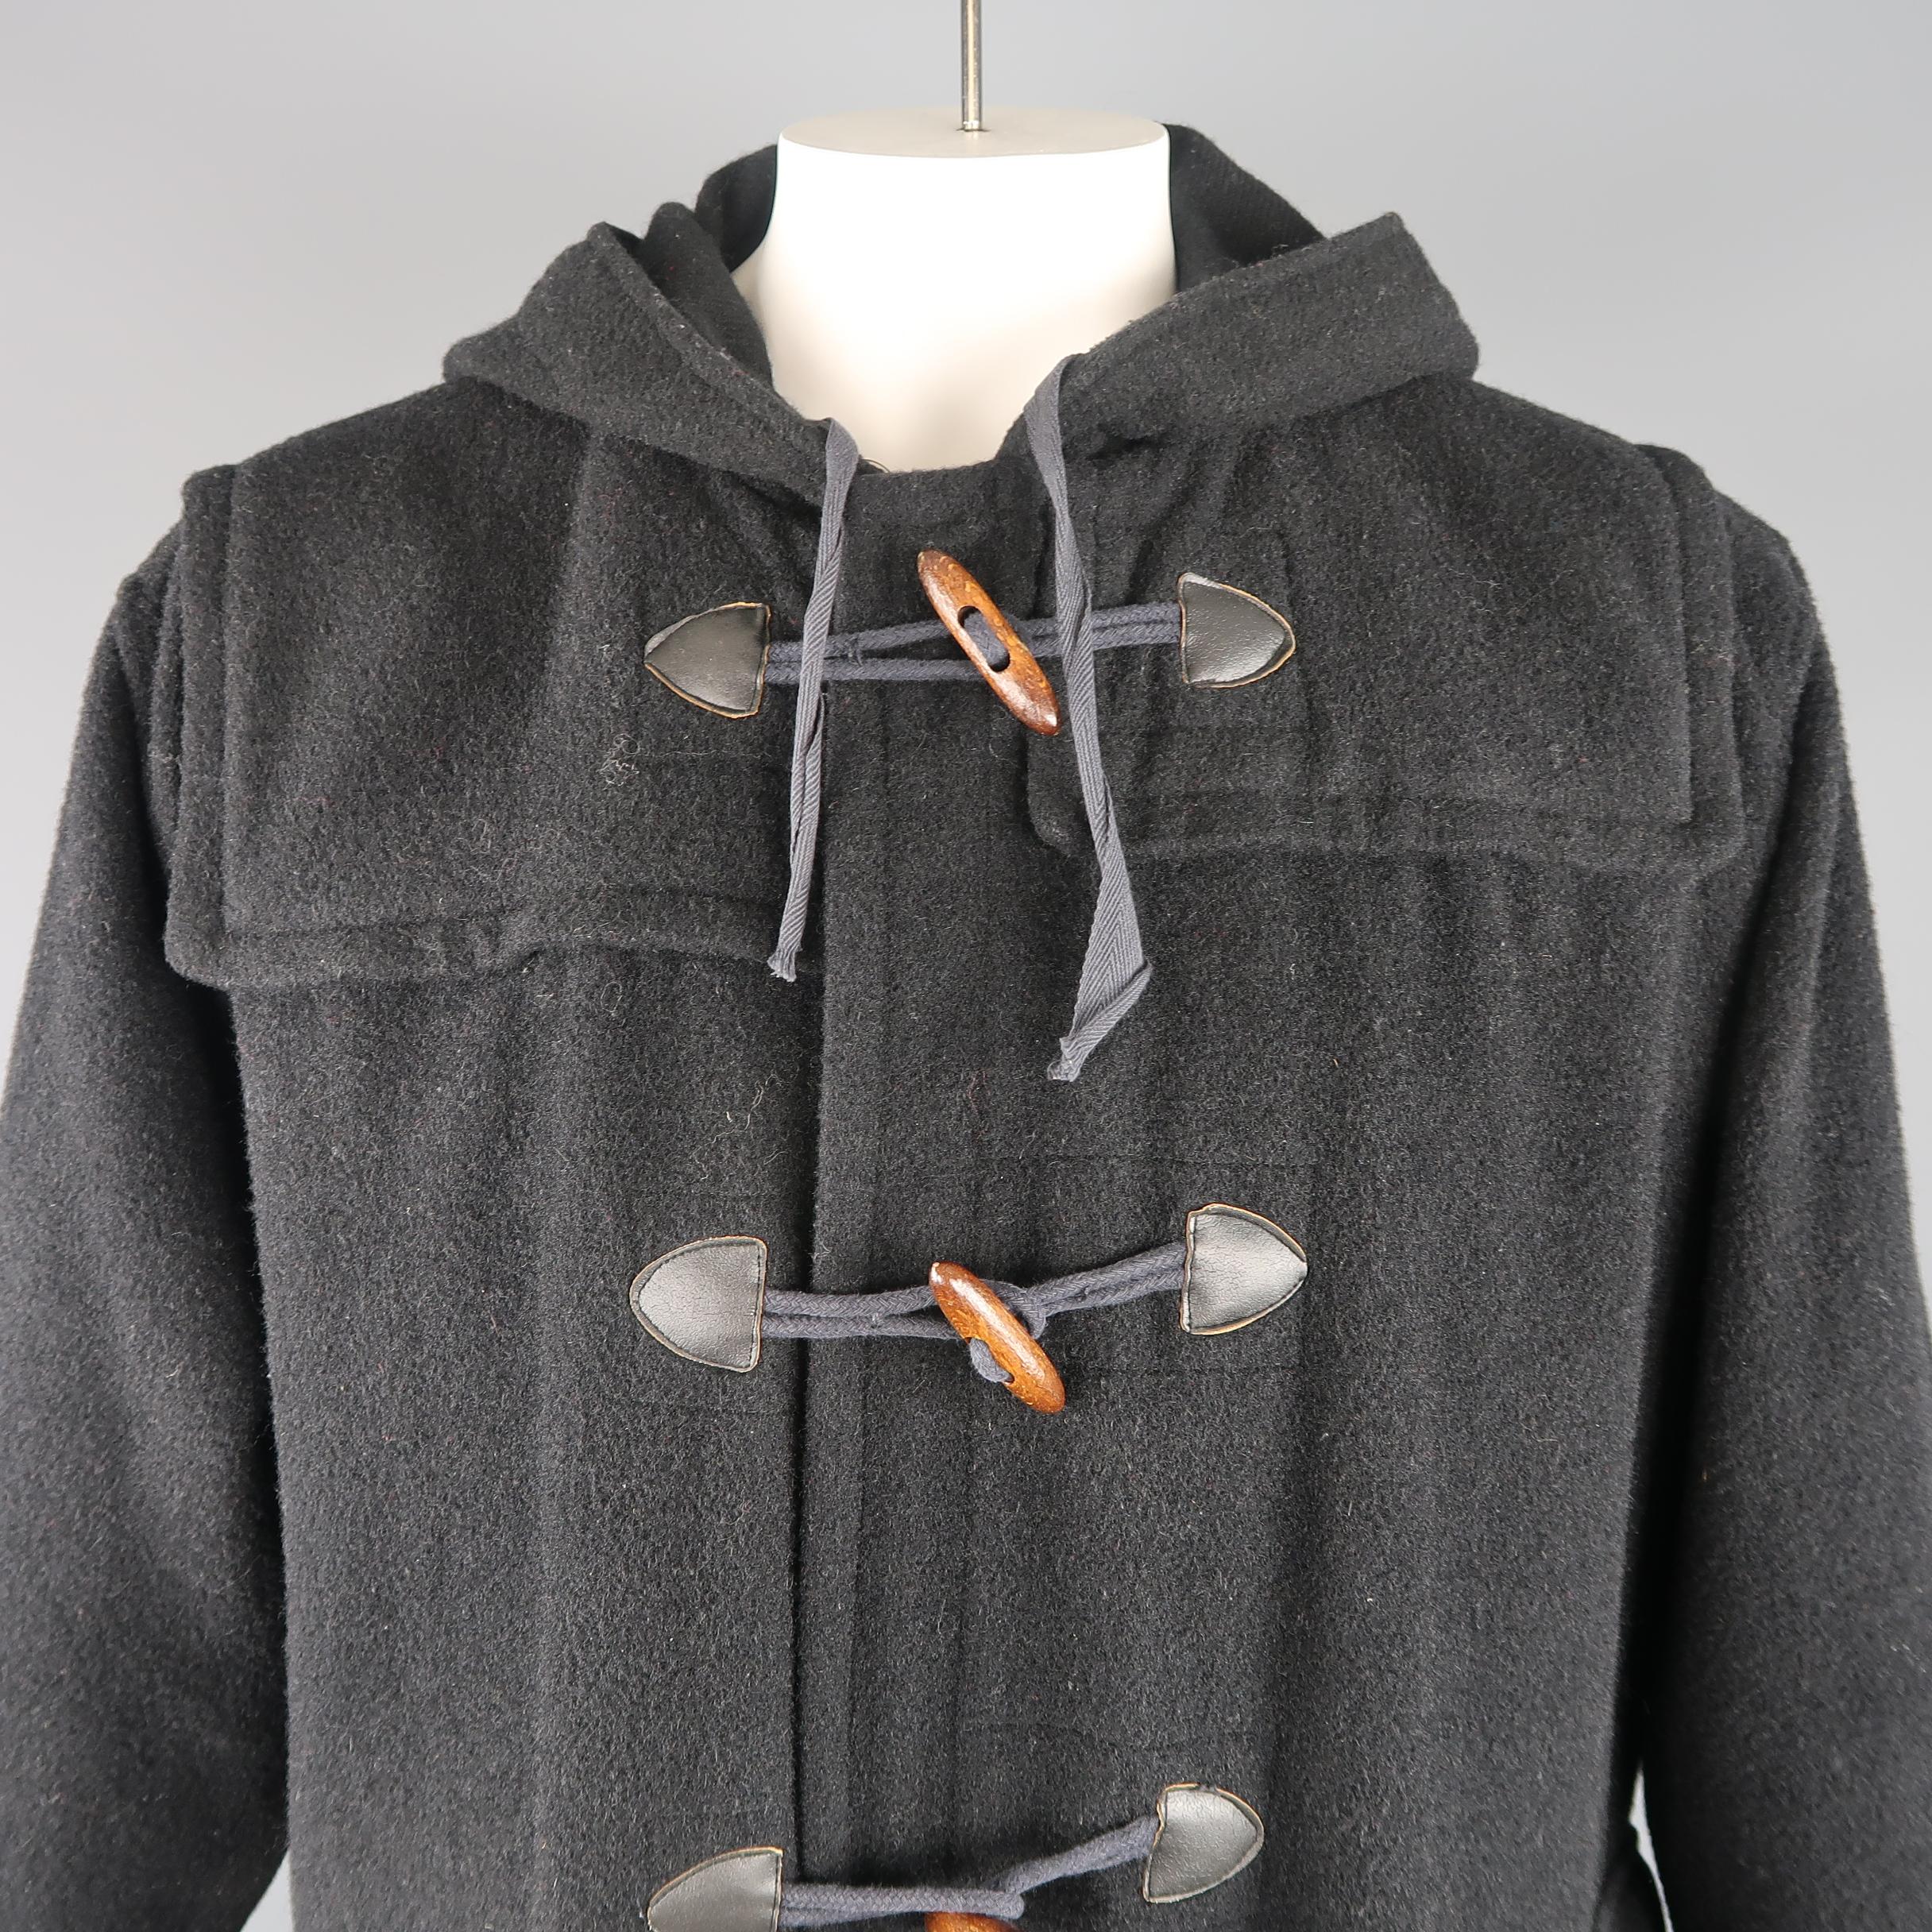 Vintage Junior Gaultier By Jean Paul Gaultier coat comes in a wool blend felt with an oversized silhouette, toggle closures, patch flap pockets, and drawstring hood. Minor wear throughout. Made in Italy.
 
Good Pre-Owned Condition.
Marked: L
